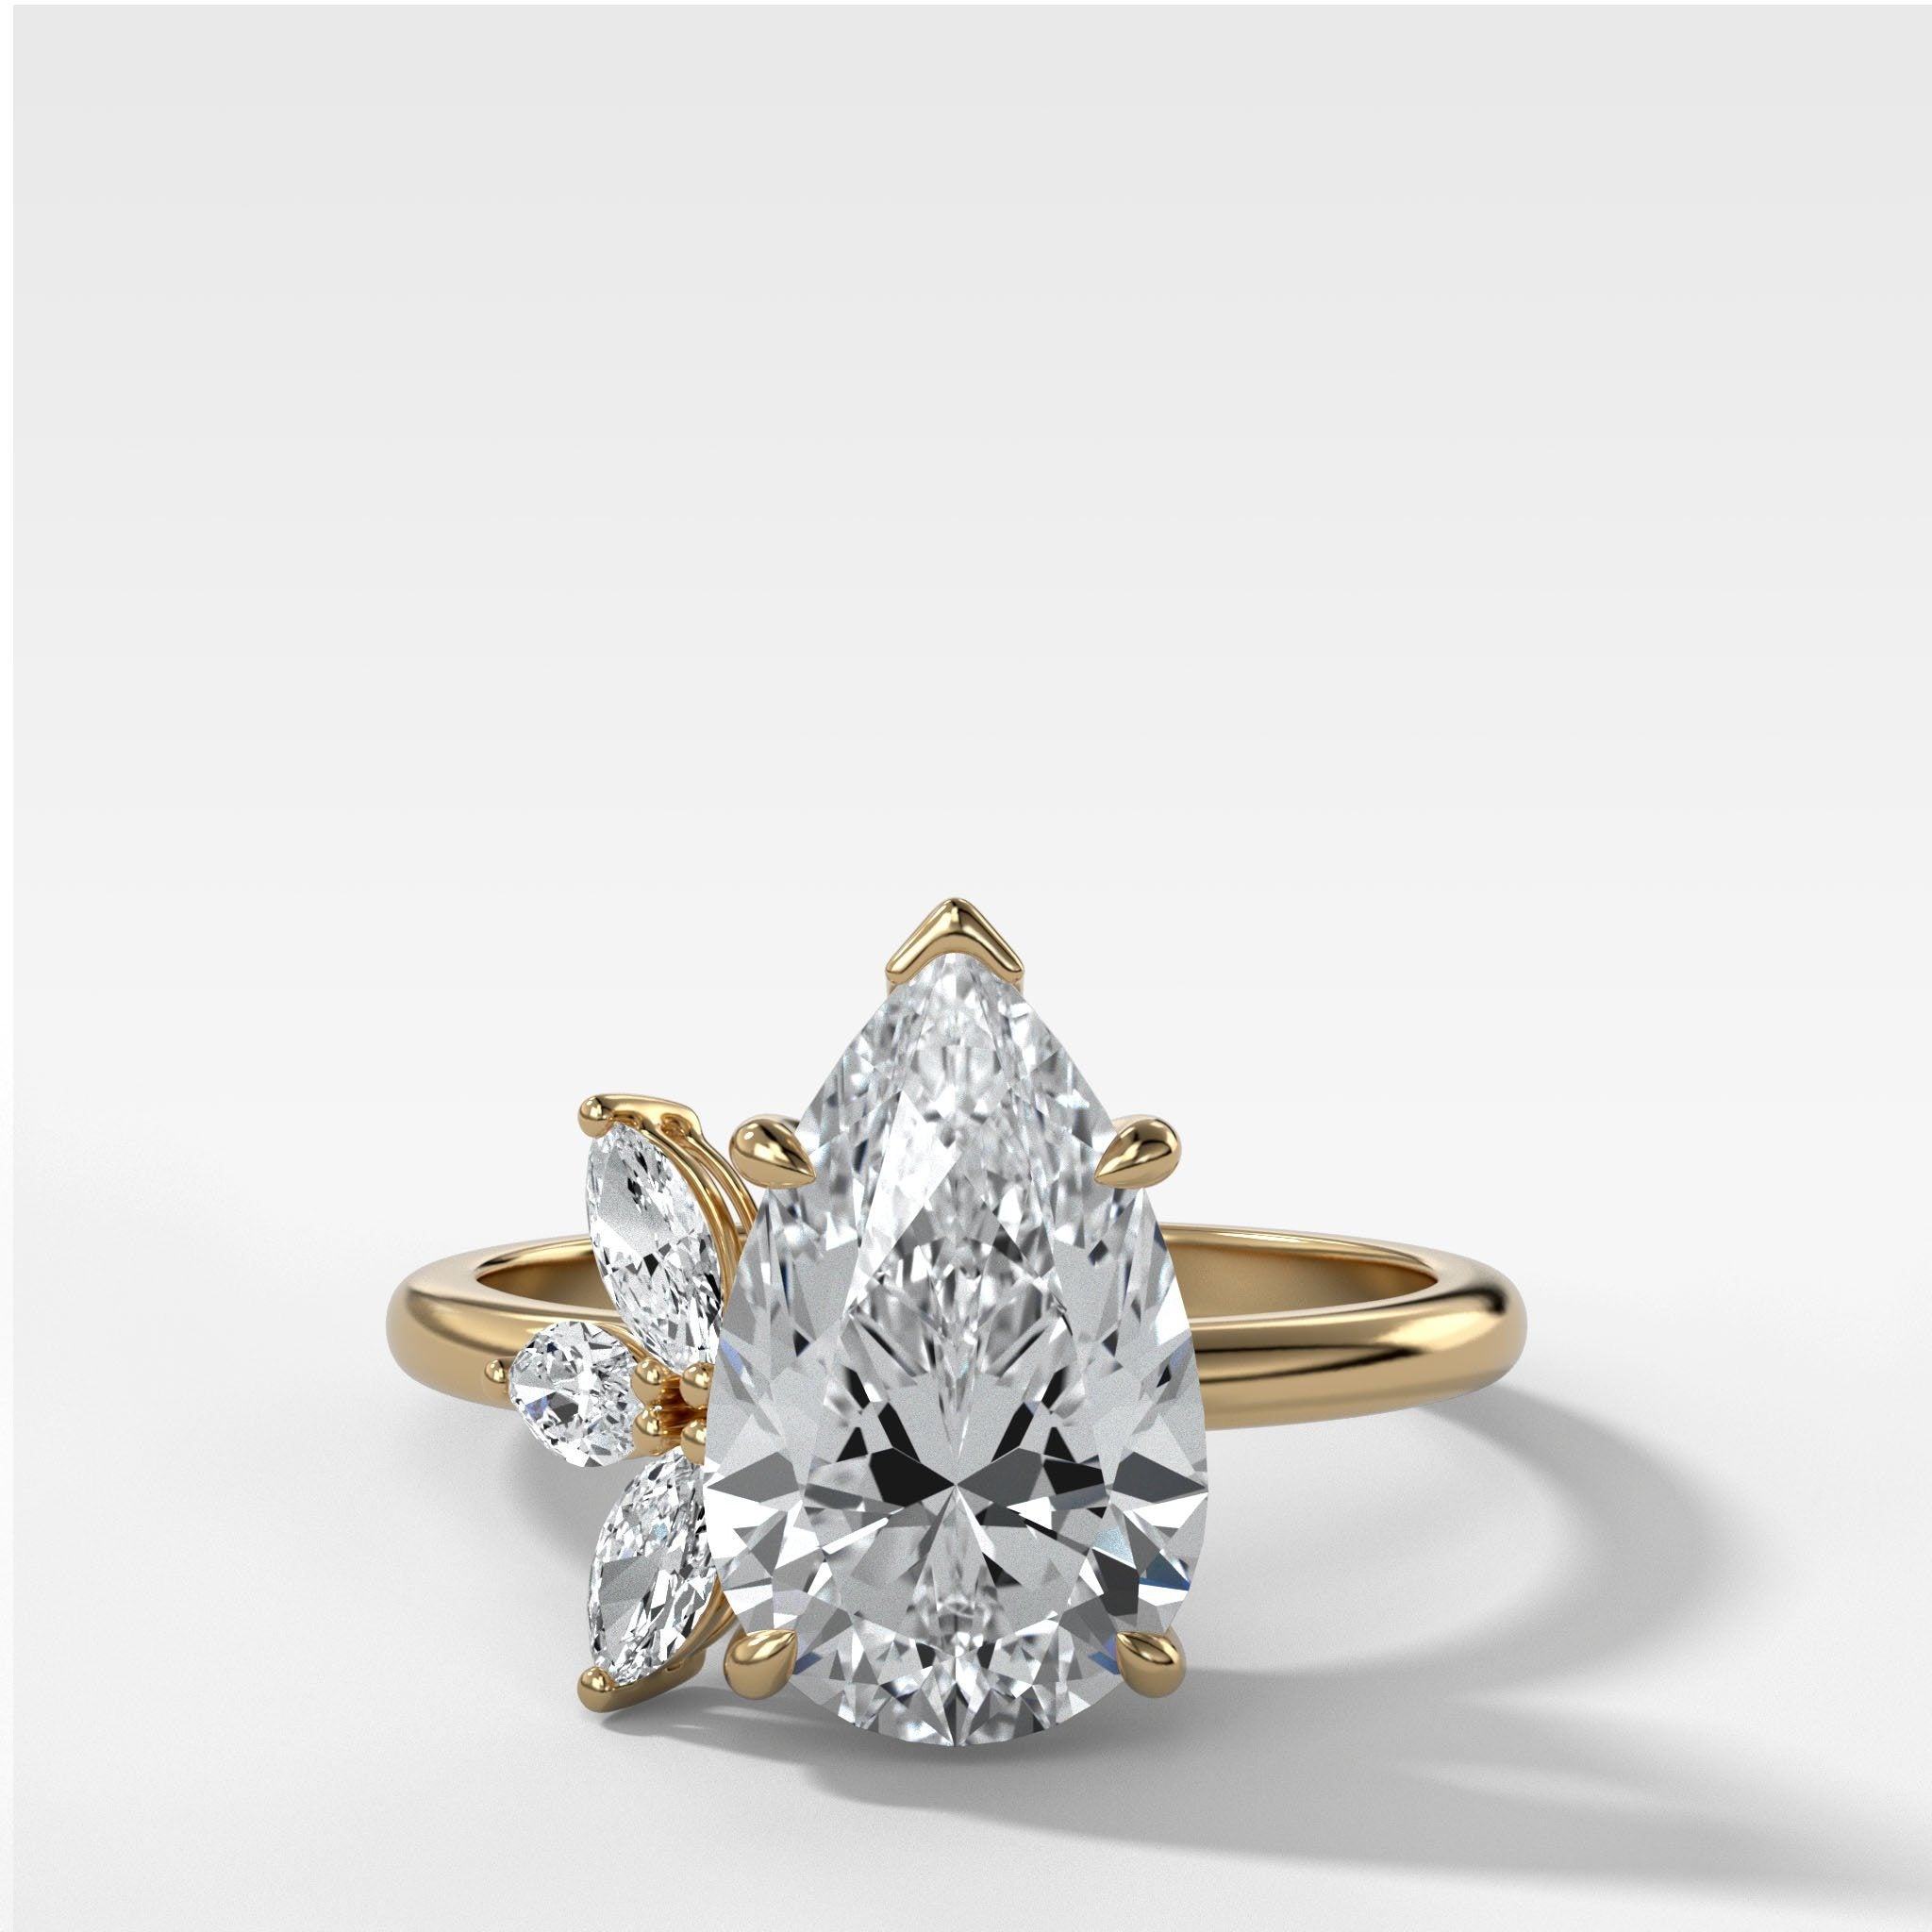 The right way to wear a pear shape ring - Midas Jewellery